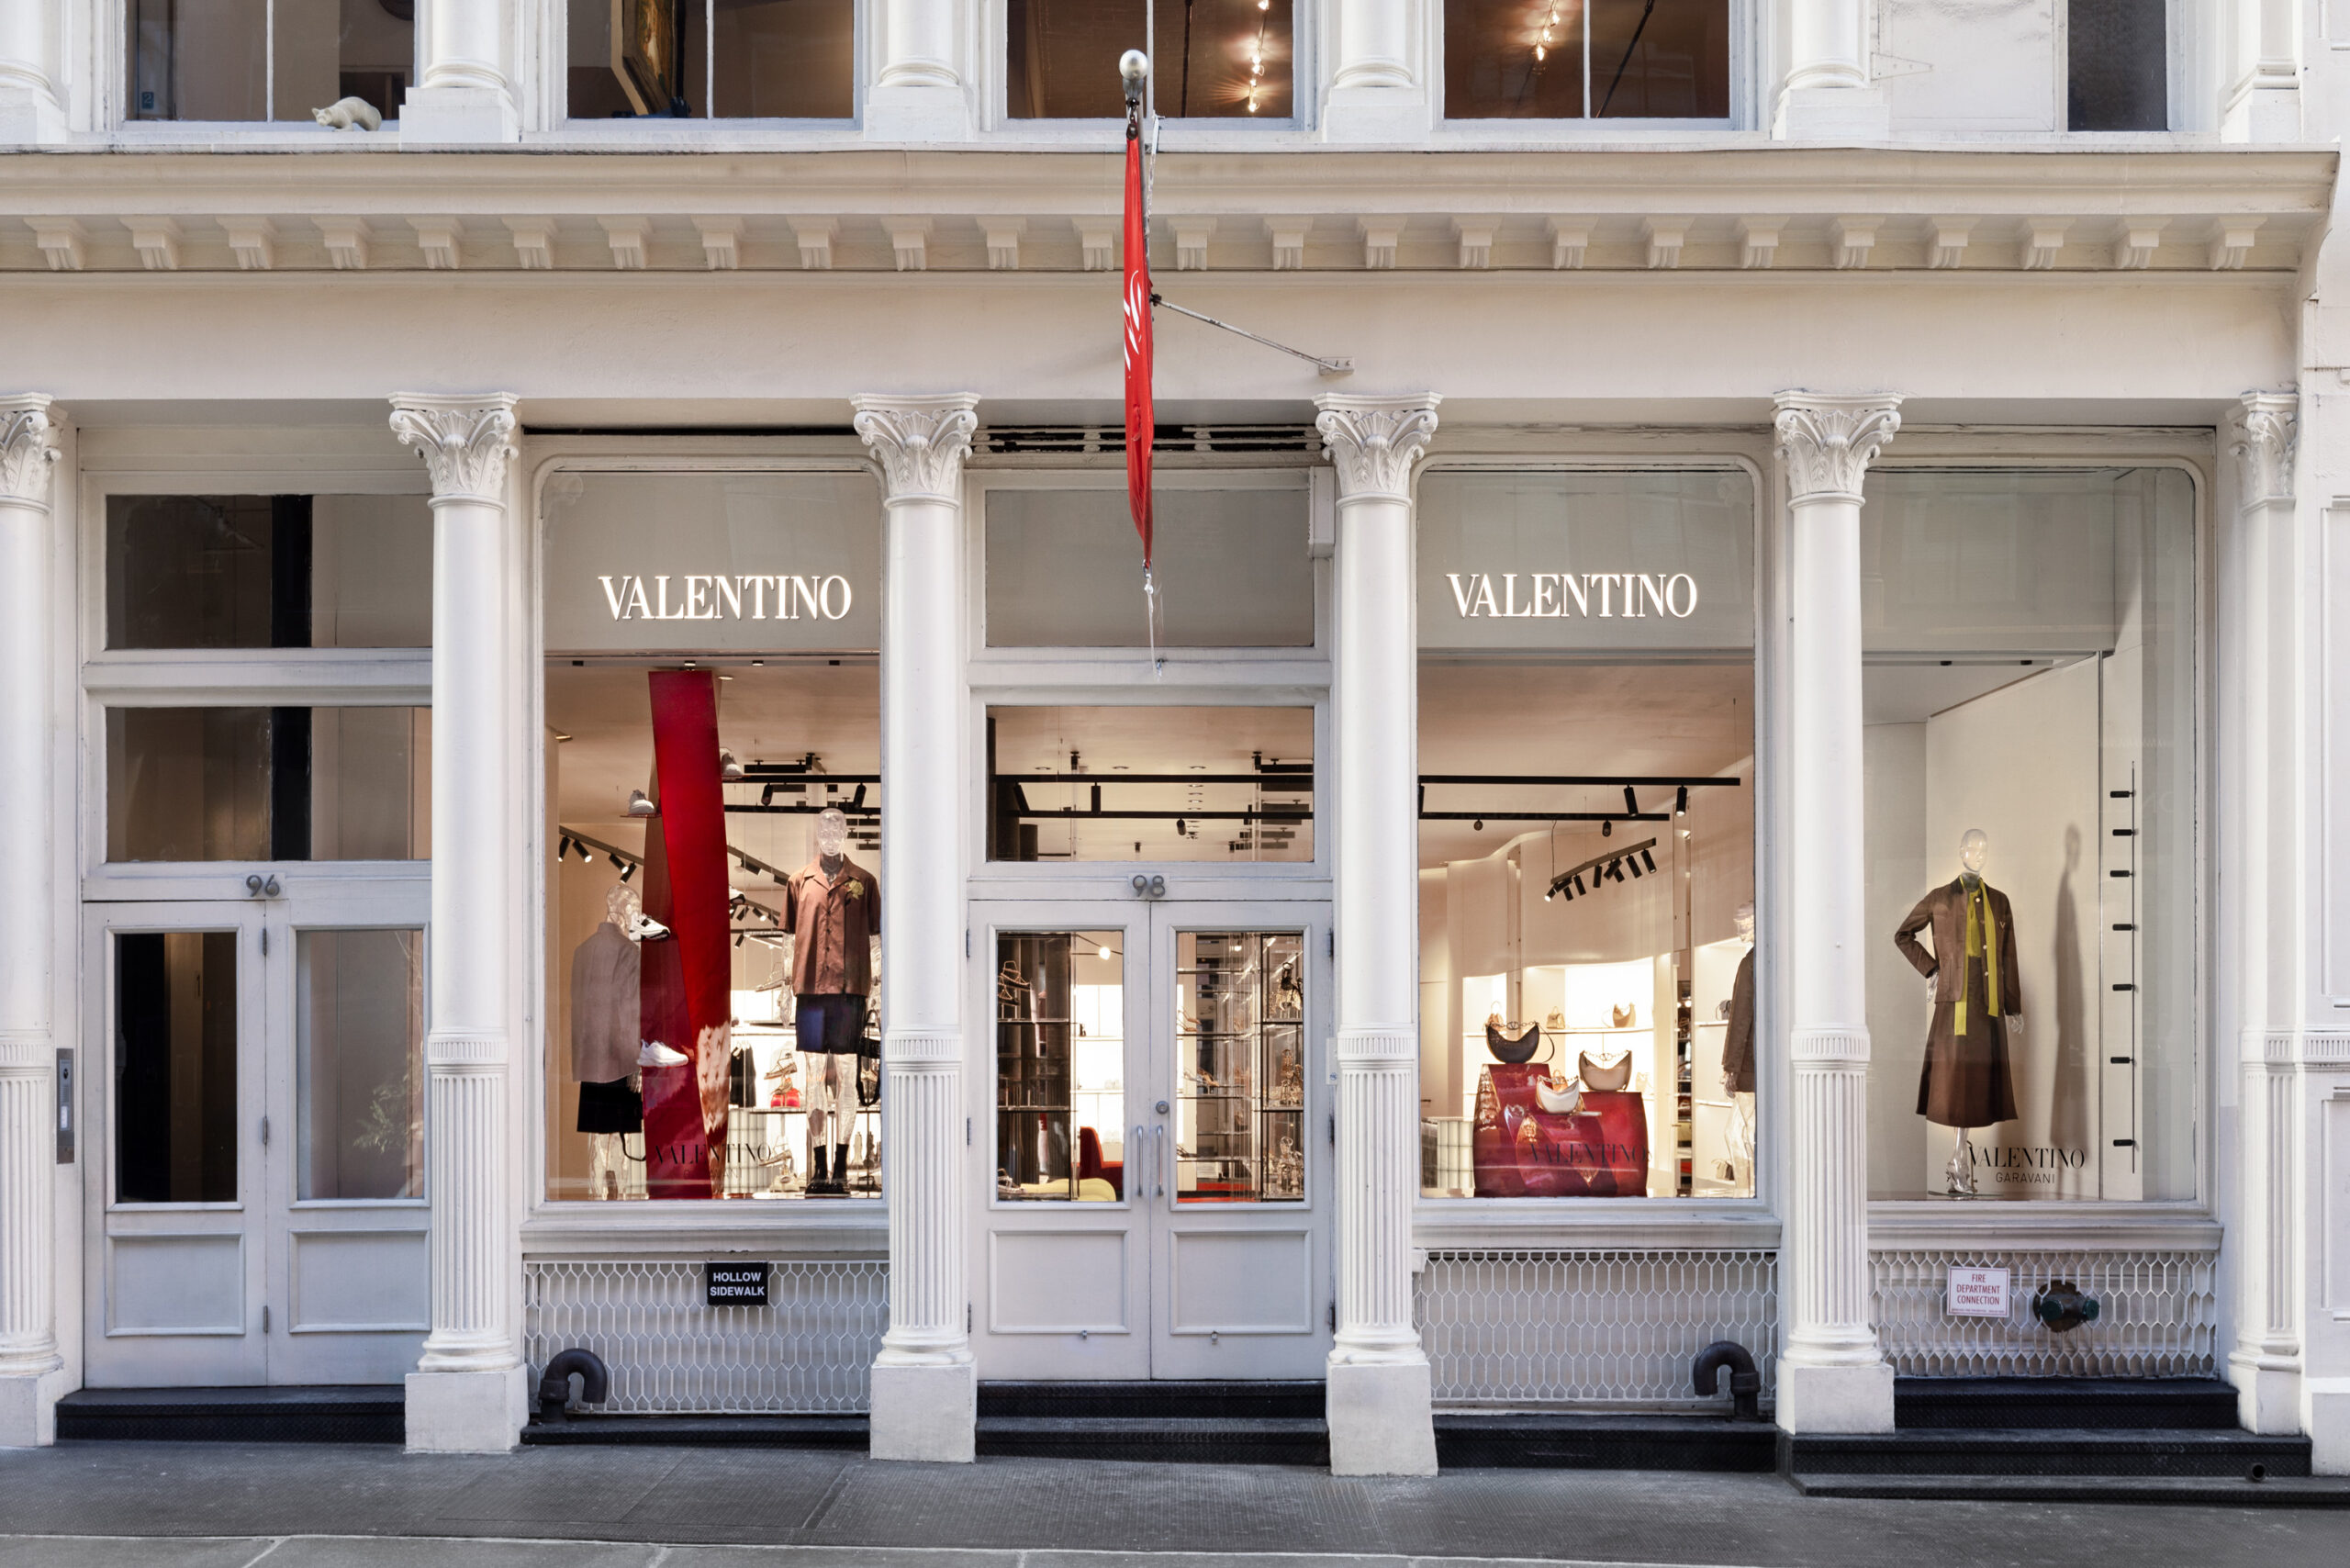 Exterior view of Valentino boutique at 98 Prince Street in New York's SoHo with large display windows showcasing fashion items.